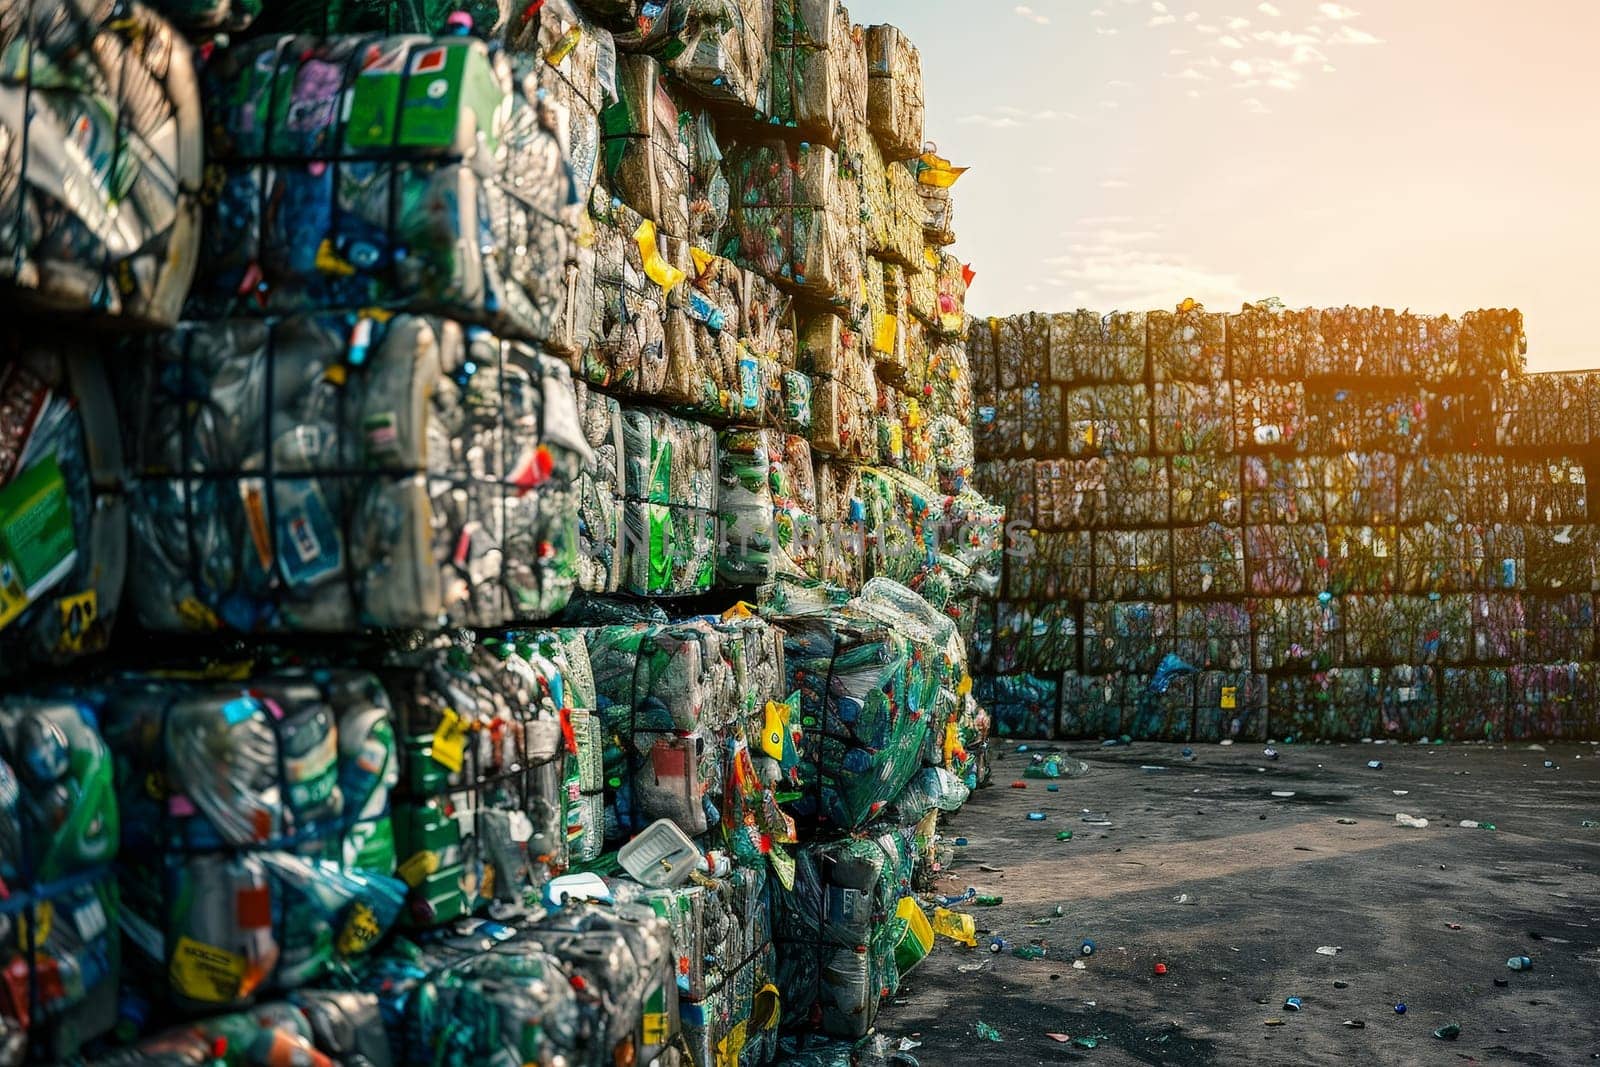 Pile of Plastic Bottles, Flattened plastic bottles are collected and packed in bales for recycling.